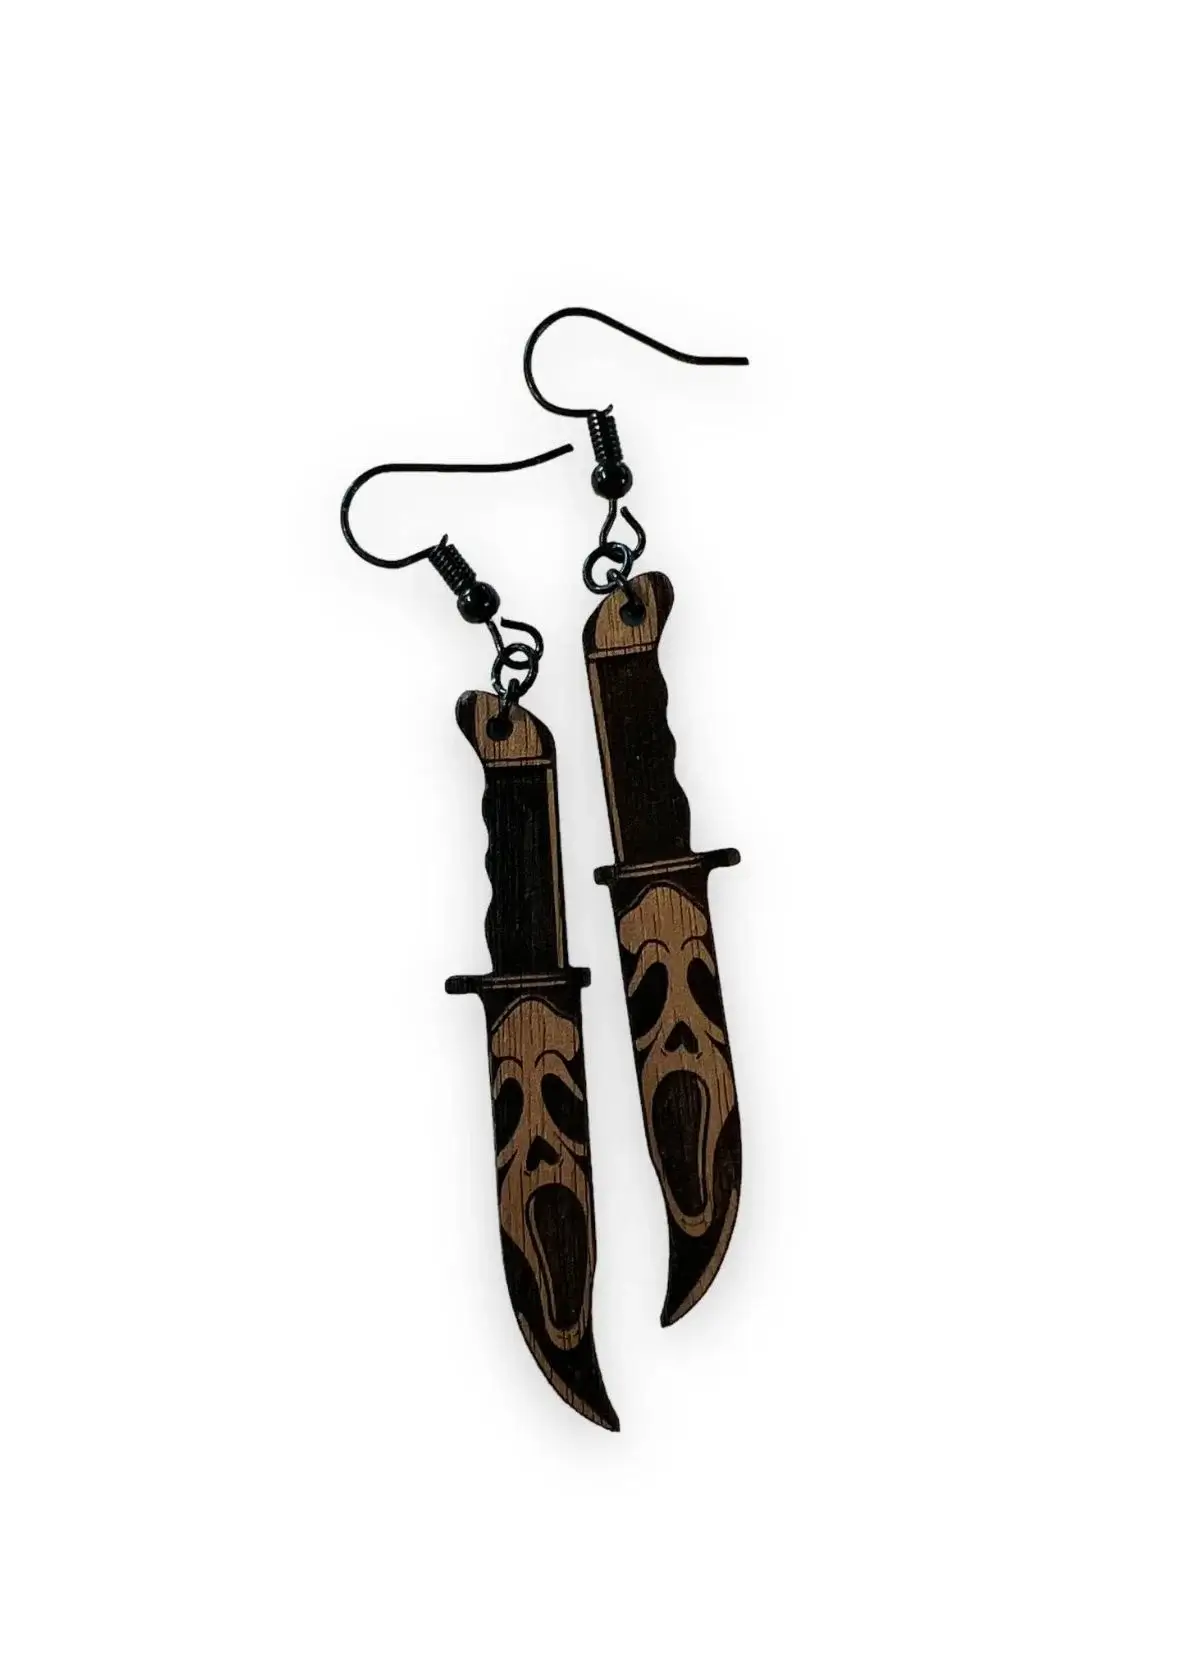 What are knife earrings?